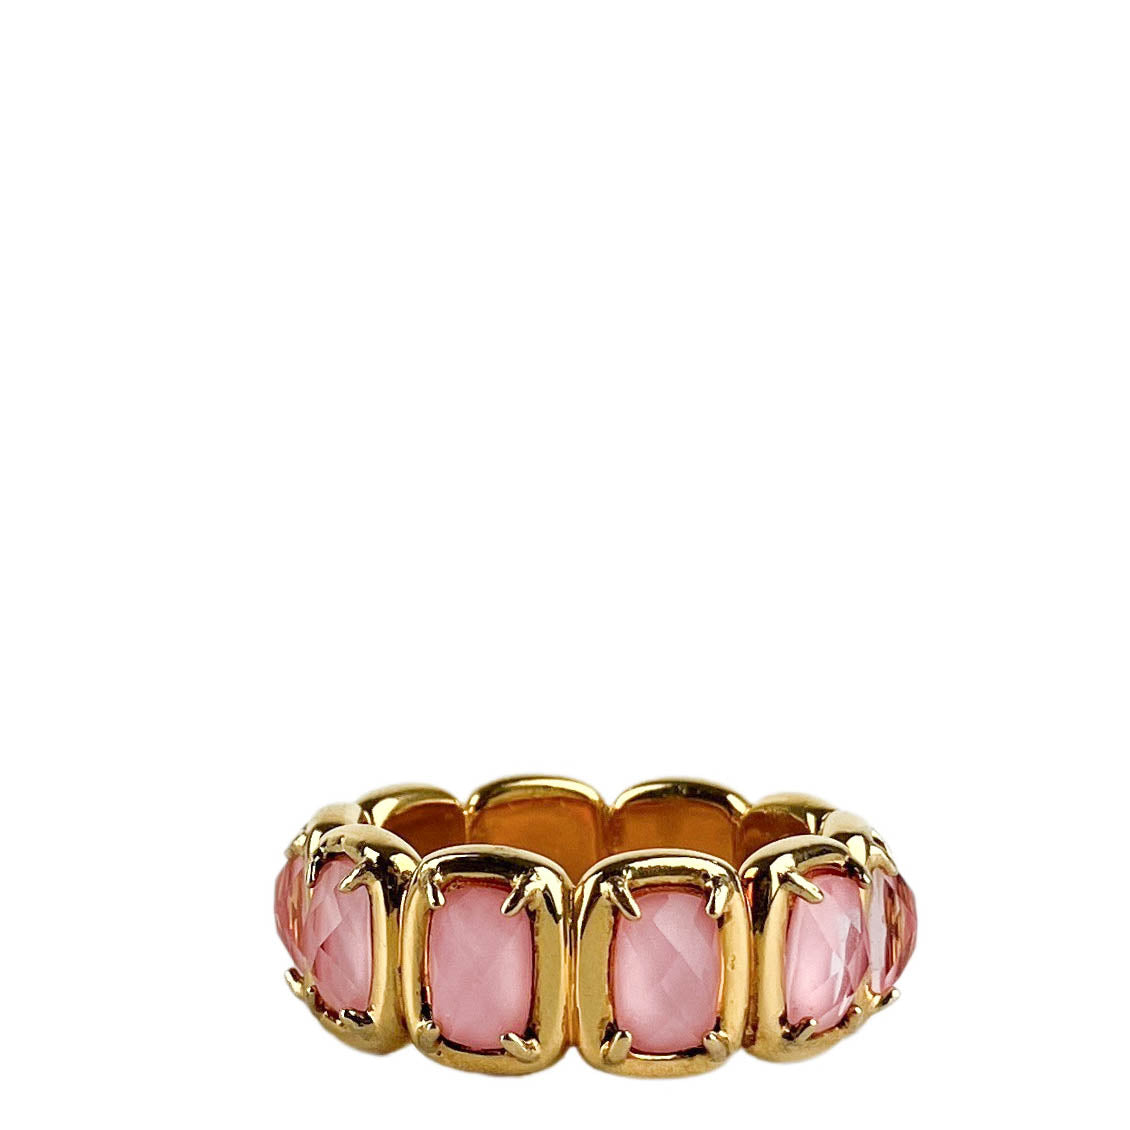 IVI Toy Ring in Pink Opal - Discounts on IVI at UAL